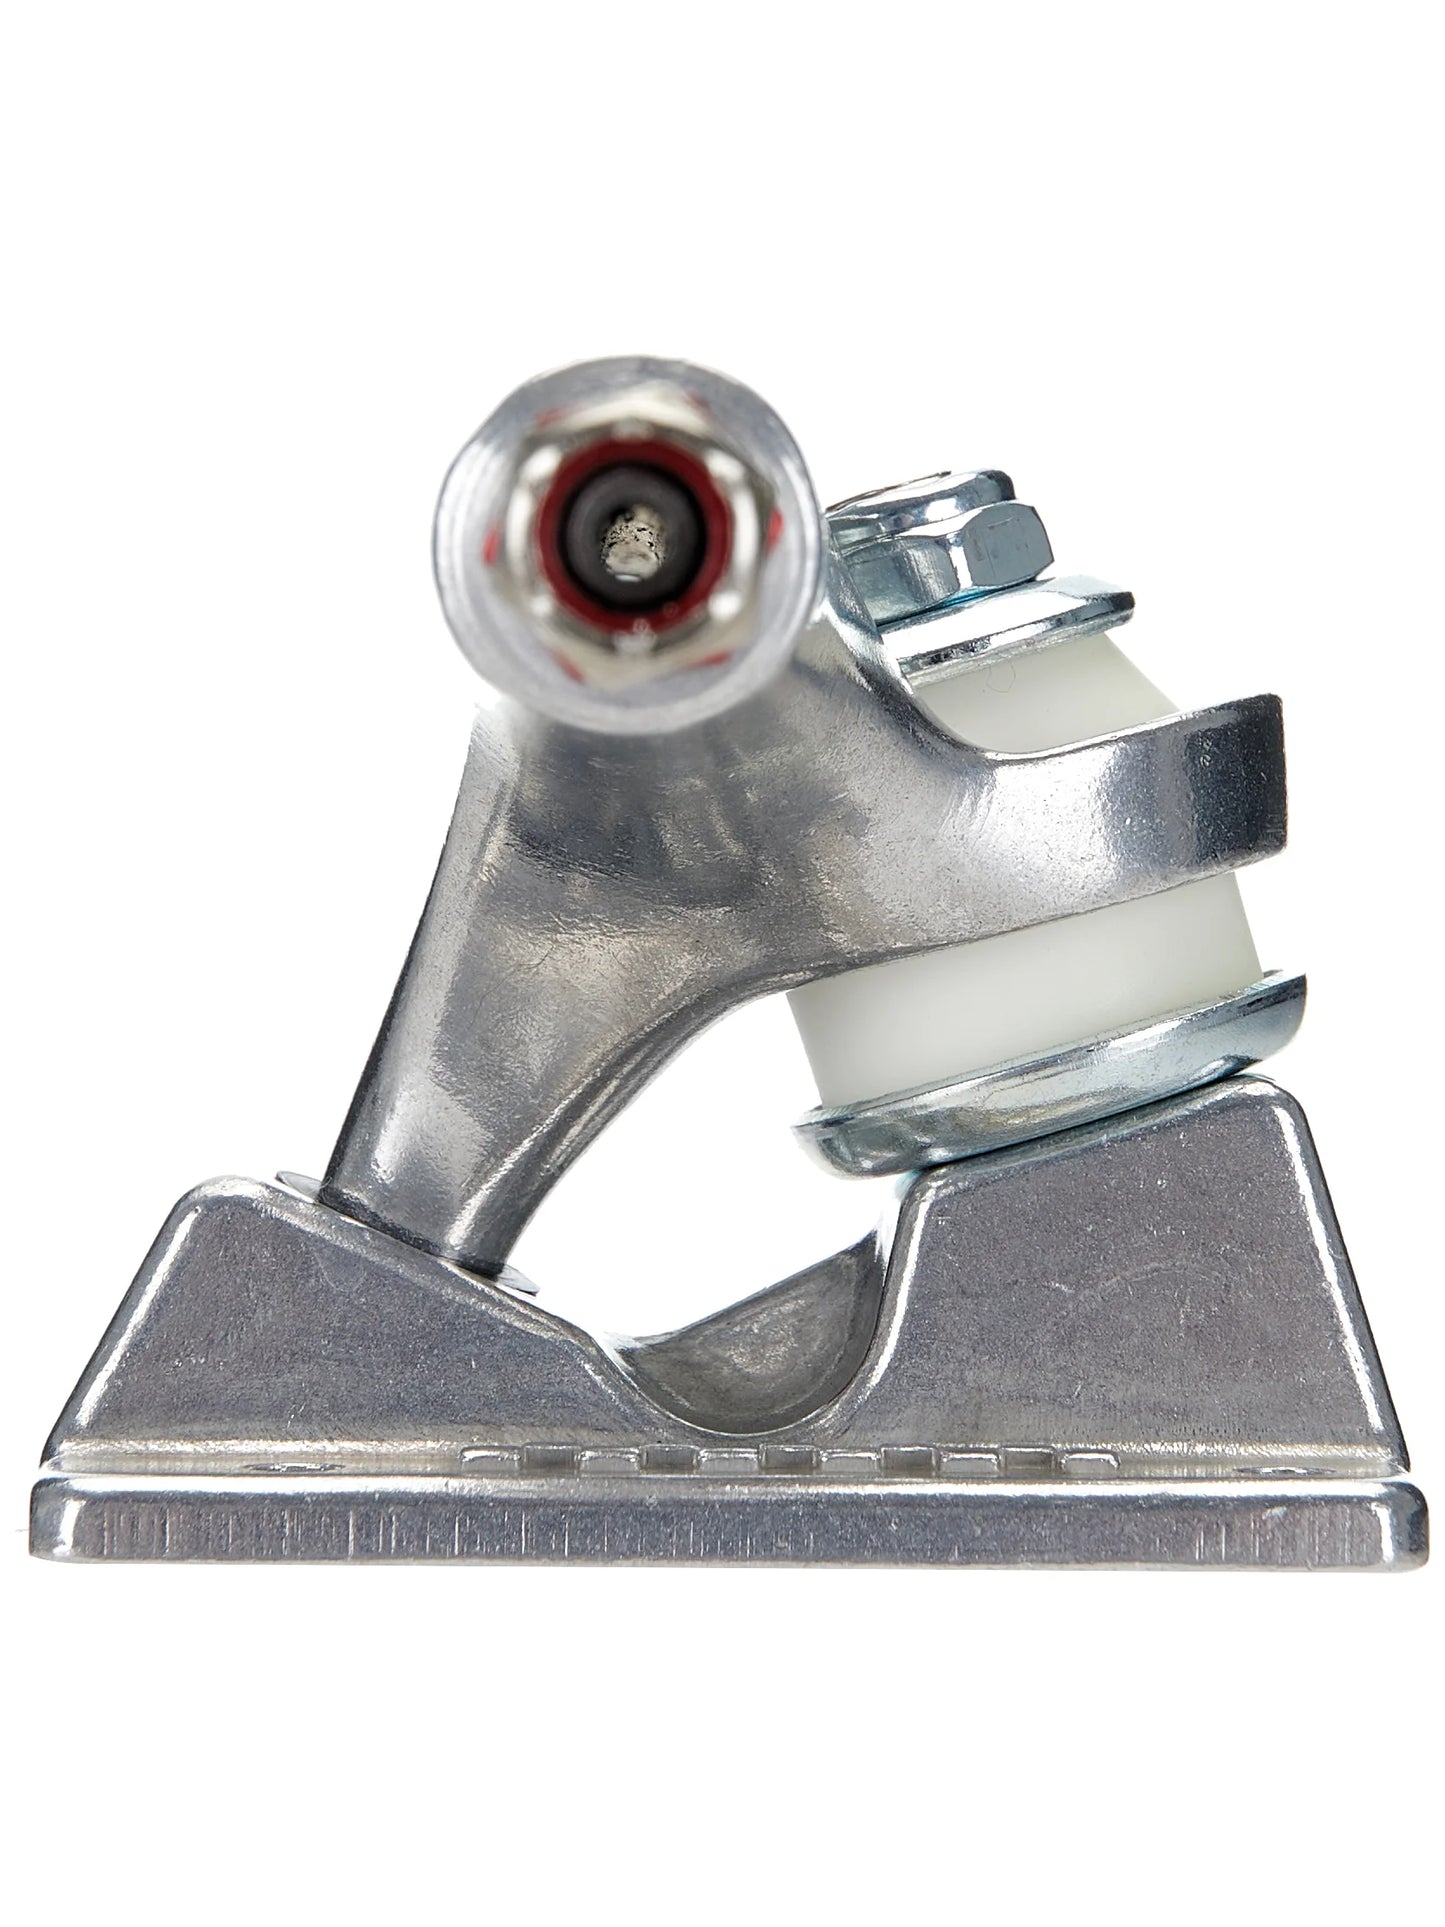 Ace AF1 Hollow Skateboard Trucks; Premium quality hollow trucks for skateboarding; Durable construction with a lightweight design; Provides excellent responsiveness and maneuverability;